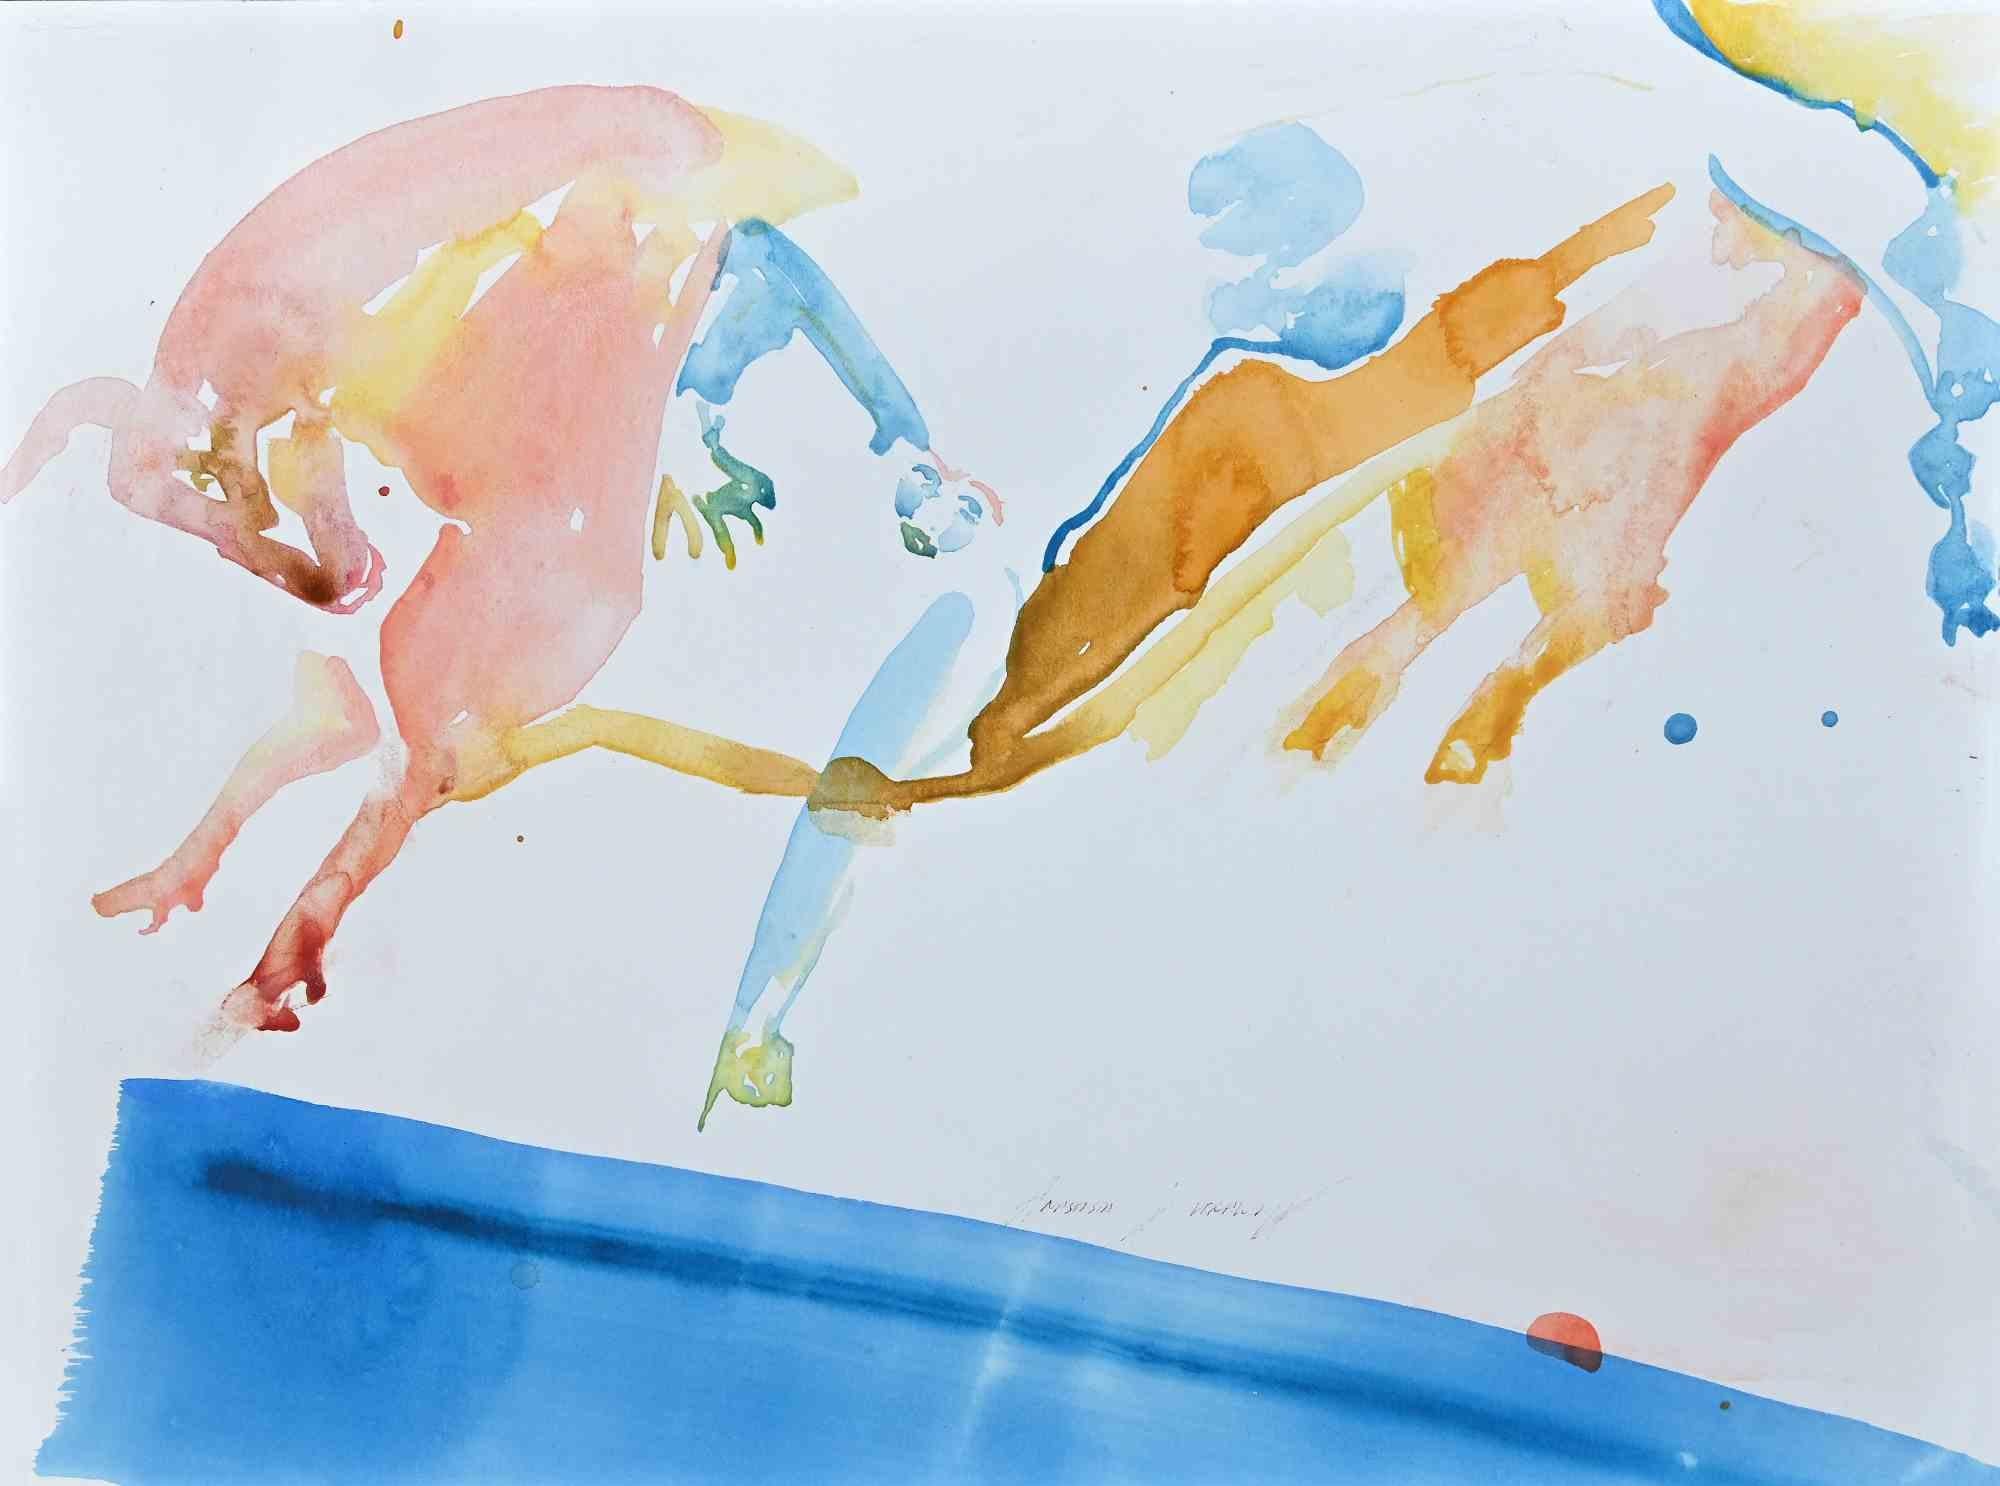 Vol en Beauf is an original watercolour realized by Anastasia Kurakina  Septembre 2018 to Paris.

The artwork is in good condition and with vivid colors.

Signature, titled and dated by the artist on the back.

Anastasia Kurakina is born in Moscow